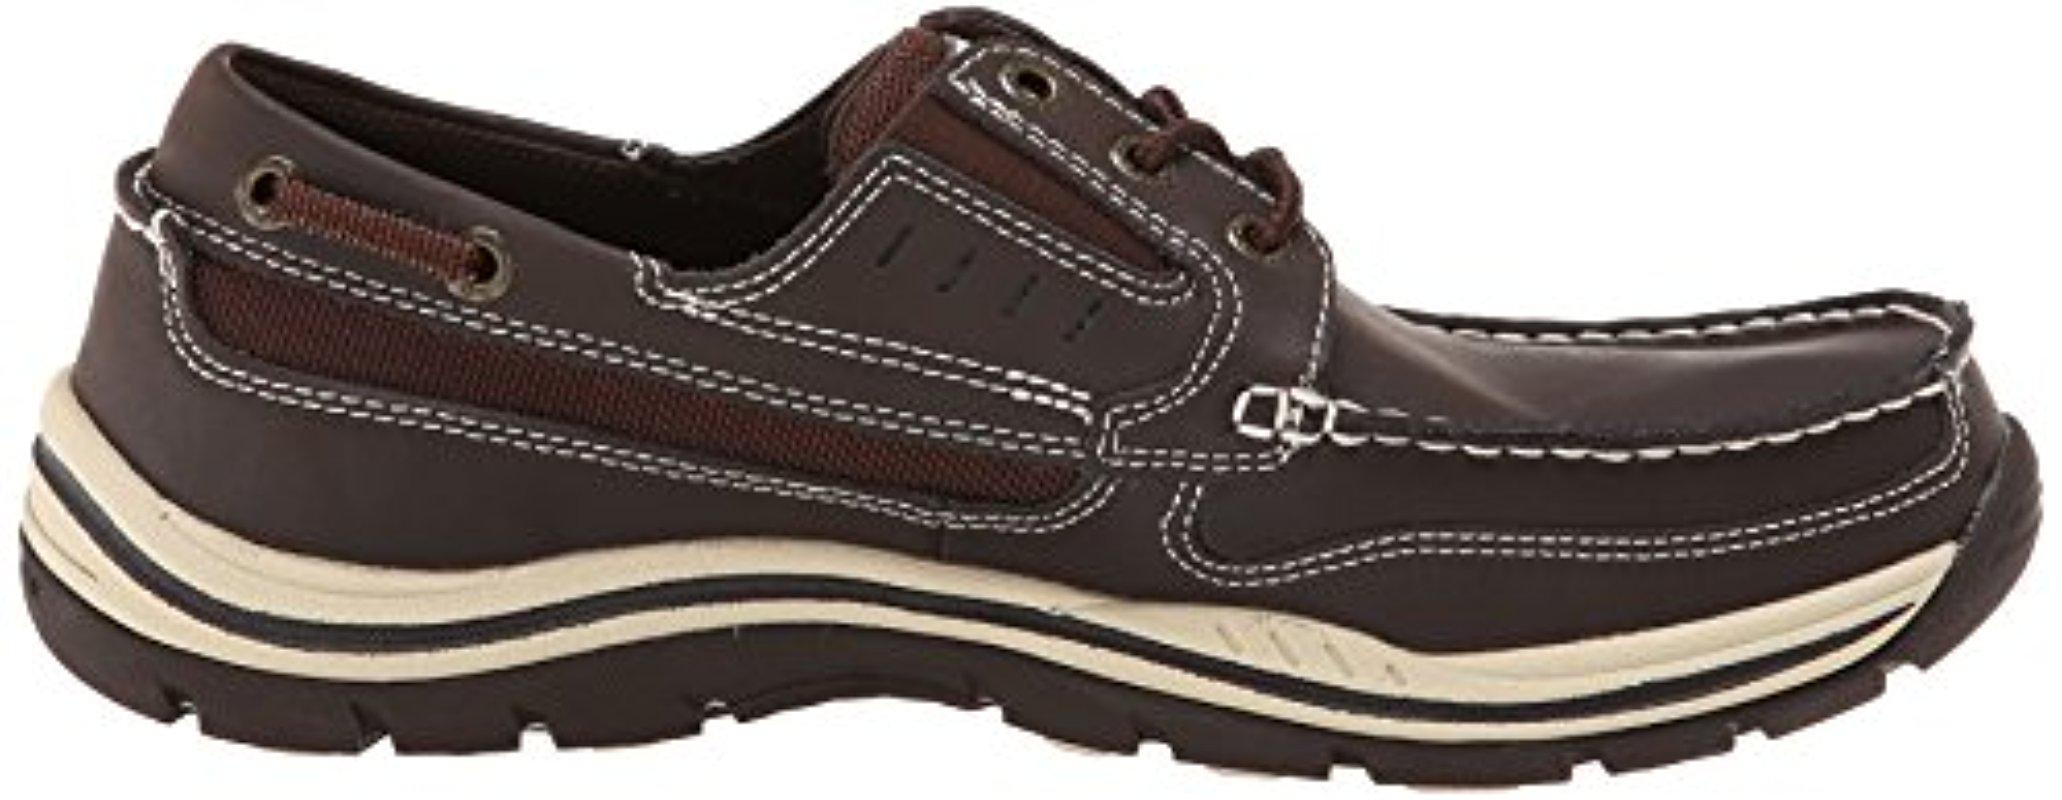 skechers usa men's expected gembel relax fit oxford